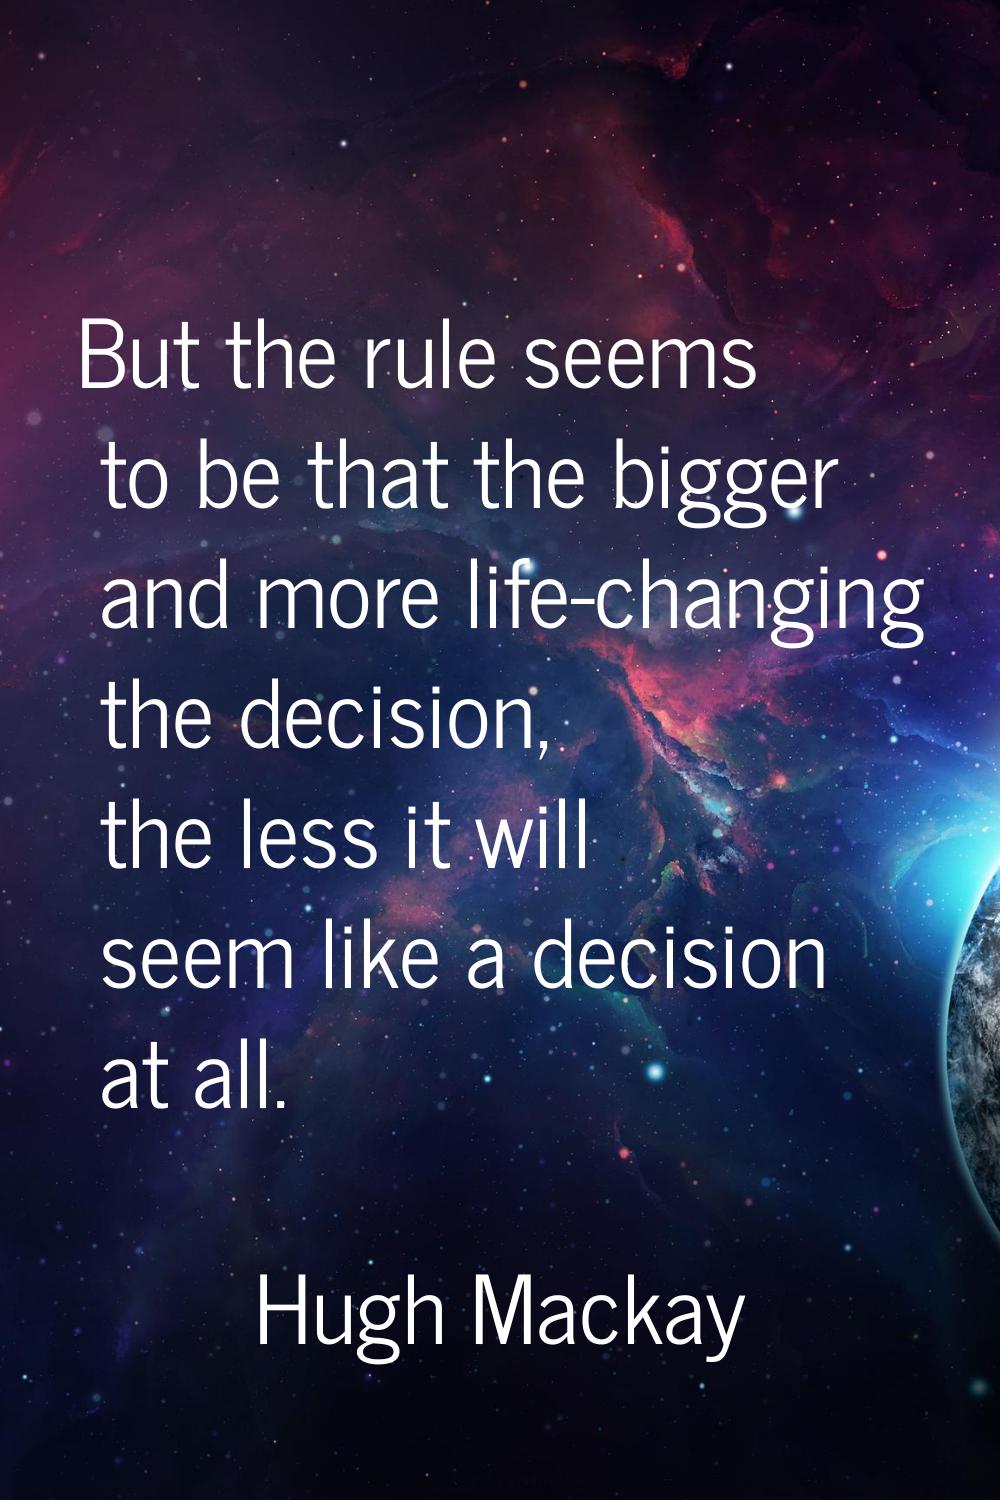 But the rule seems to be that the bigger and more life-changing the decision, the less it will seem